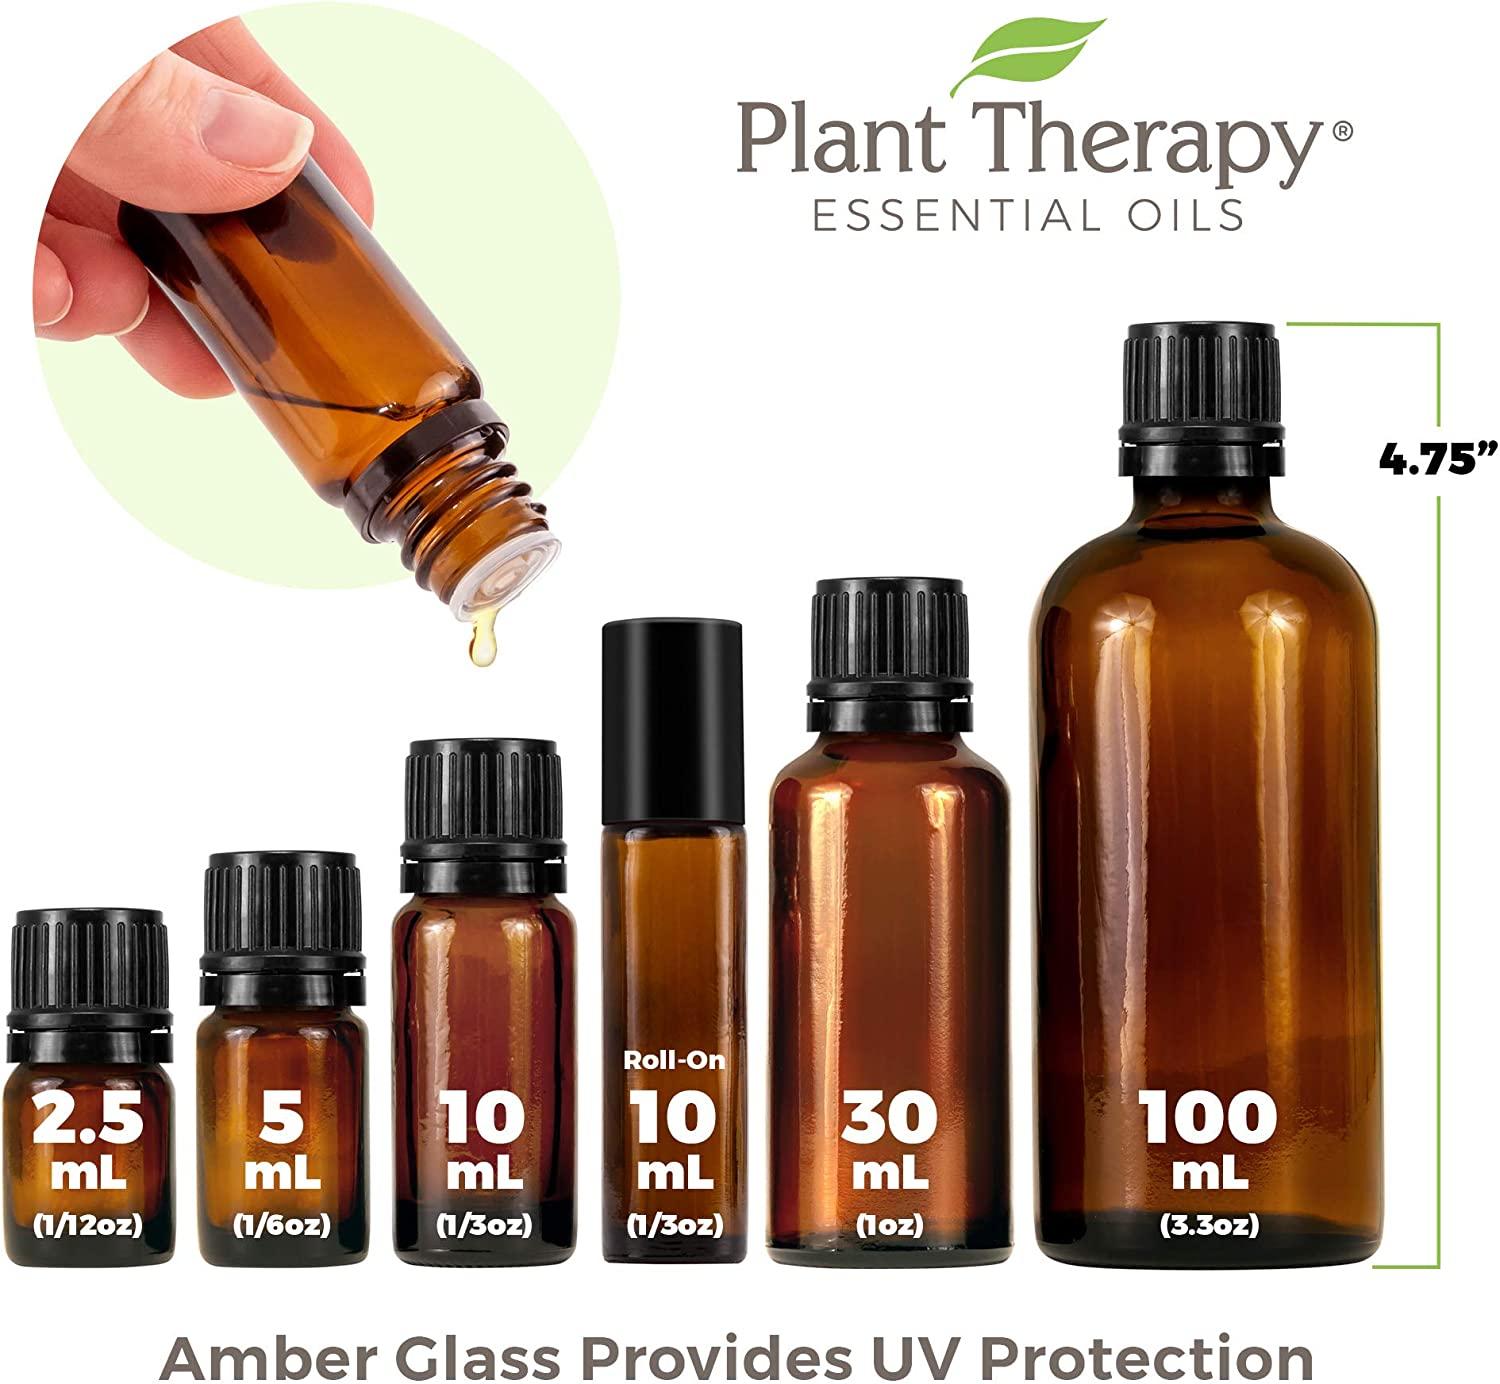 8 Pack of 5 mL 100% Pure Essential Oils, 8 bottles / 0.16 oz